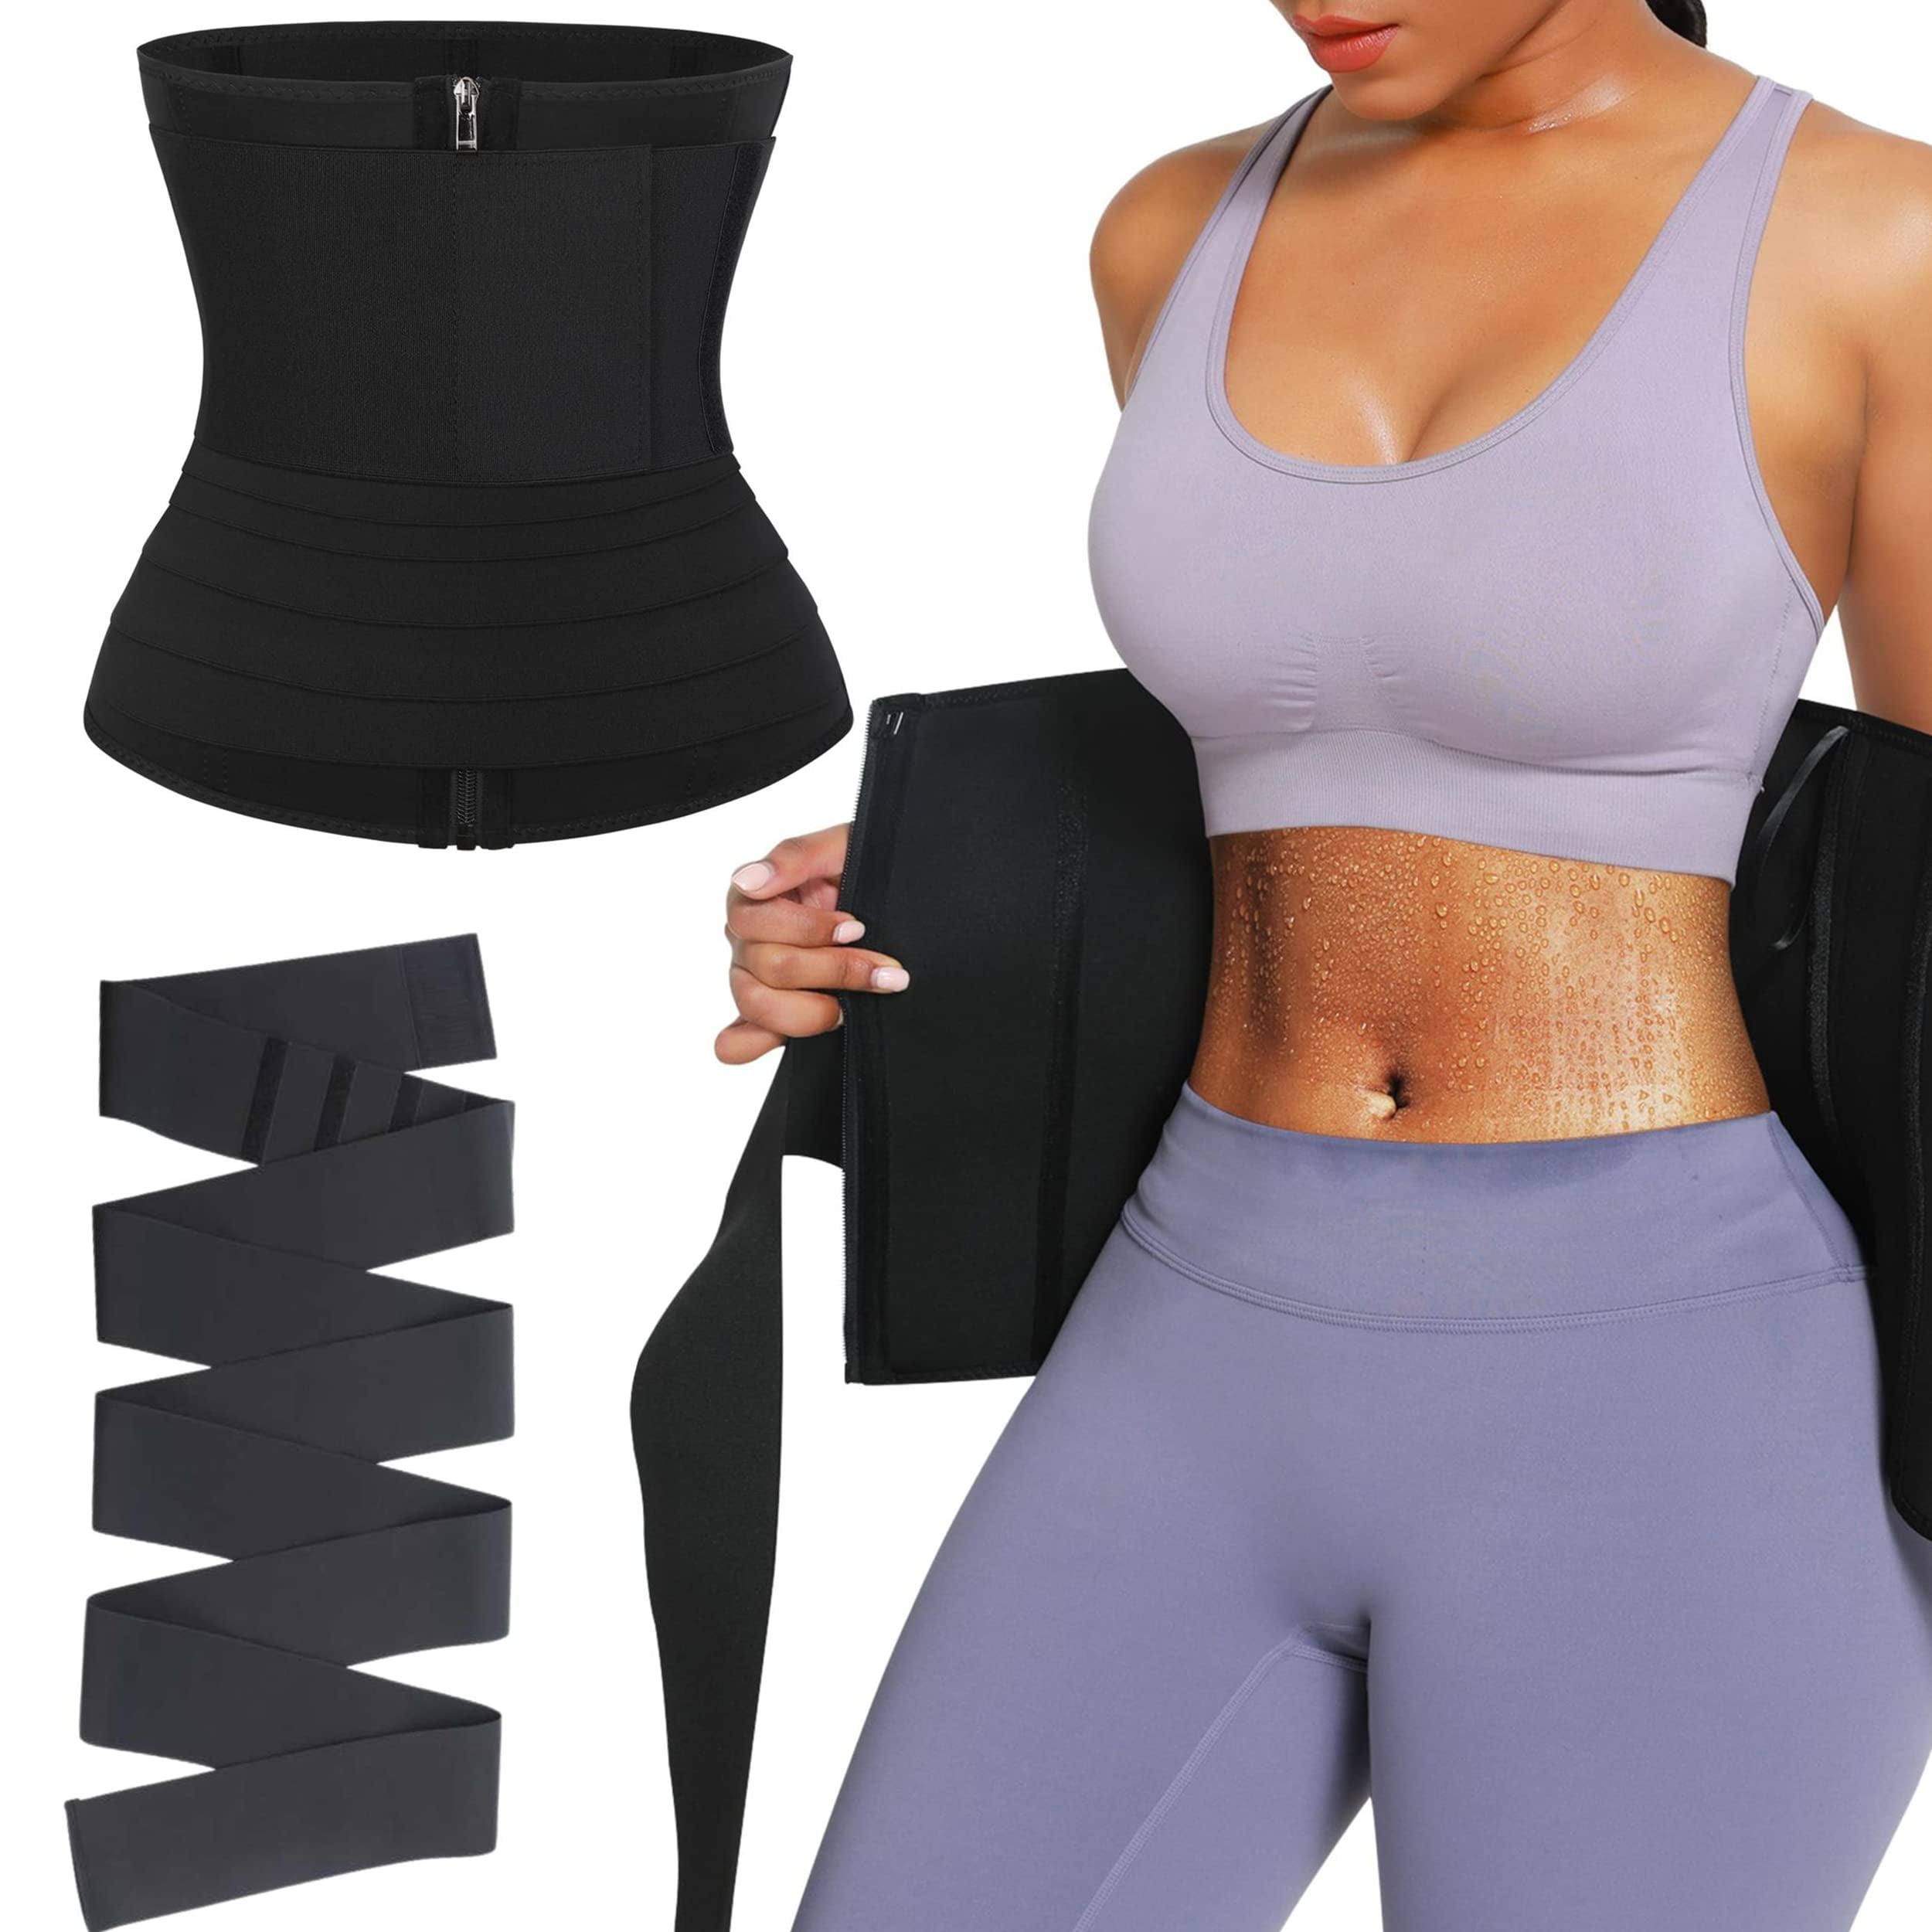 Snatch Me Up Bandage Tummy Wrap Waist Trainer Body Wraps Weight Loss Waist Trimmer for Women 